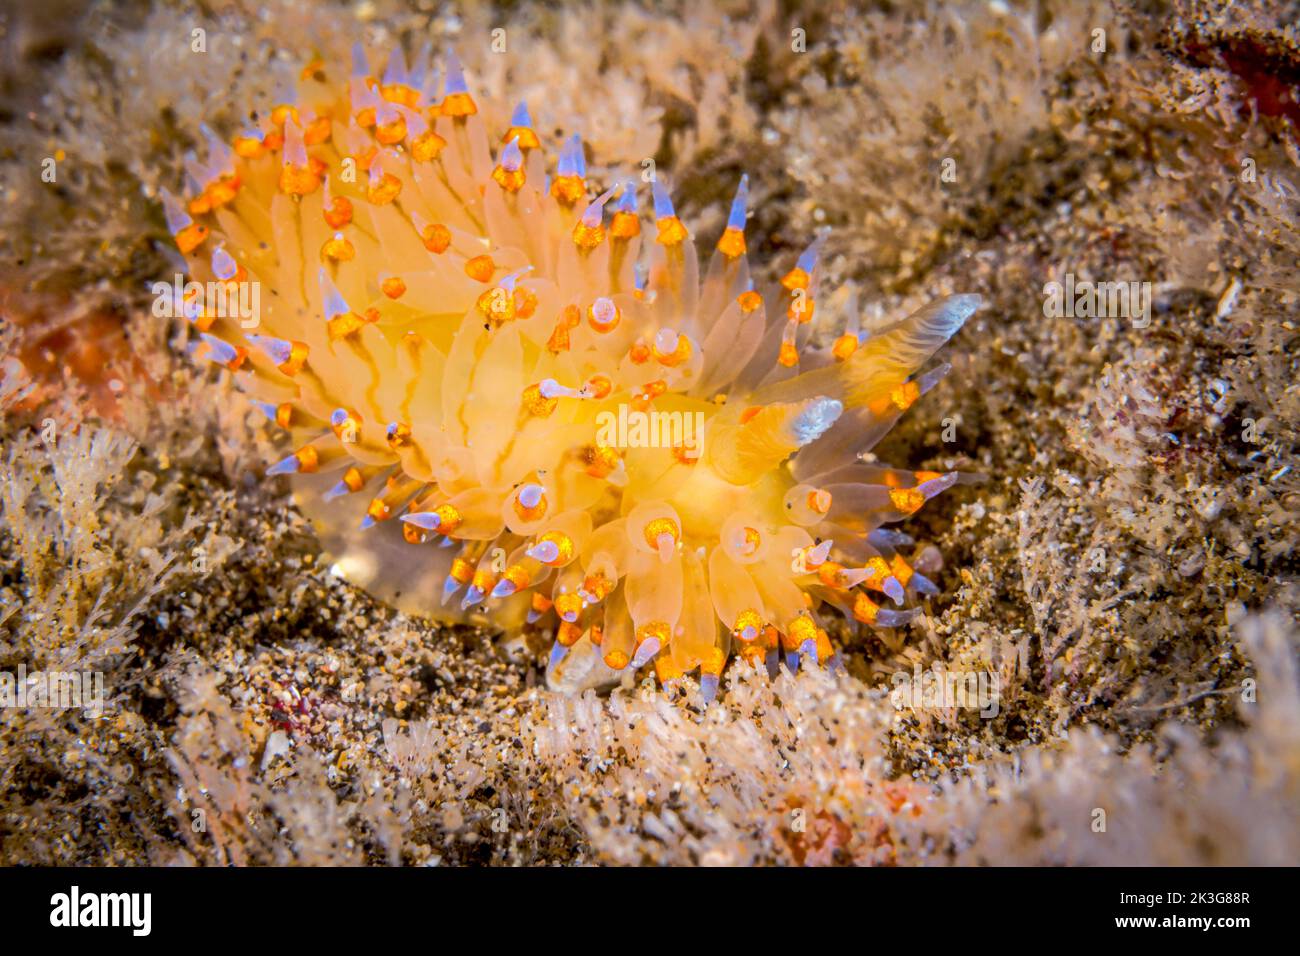 A small yellowish janolus nudibranch with blue gill tips, crawling across a reef in search for food as it hunts hydroids. Stock Photo